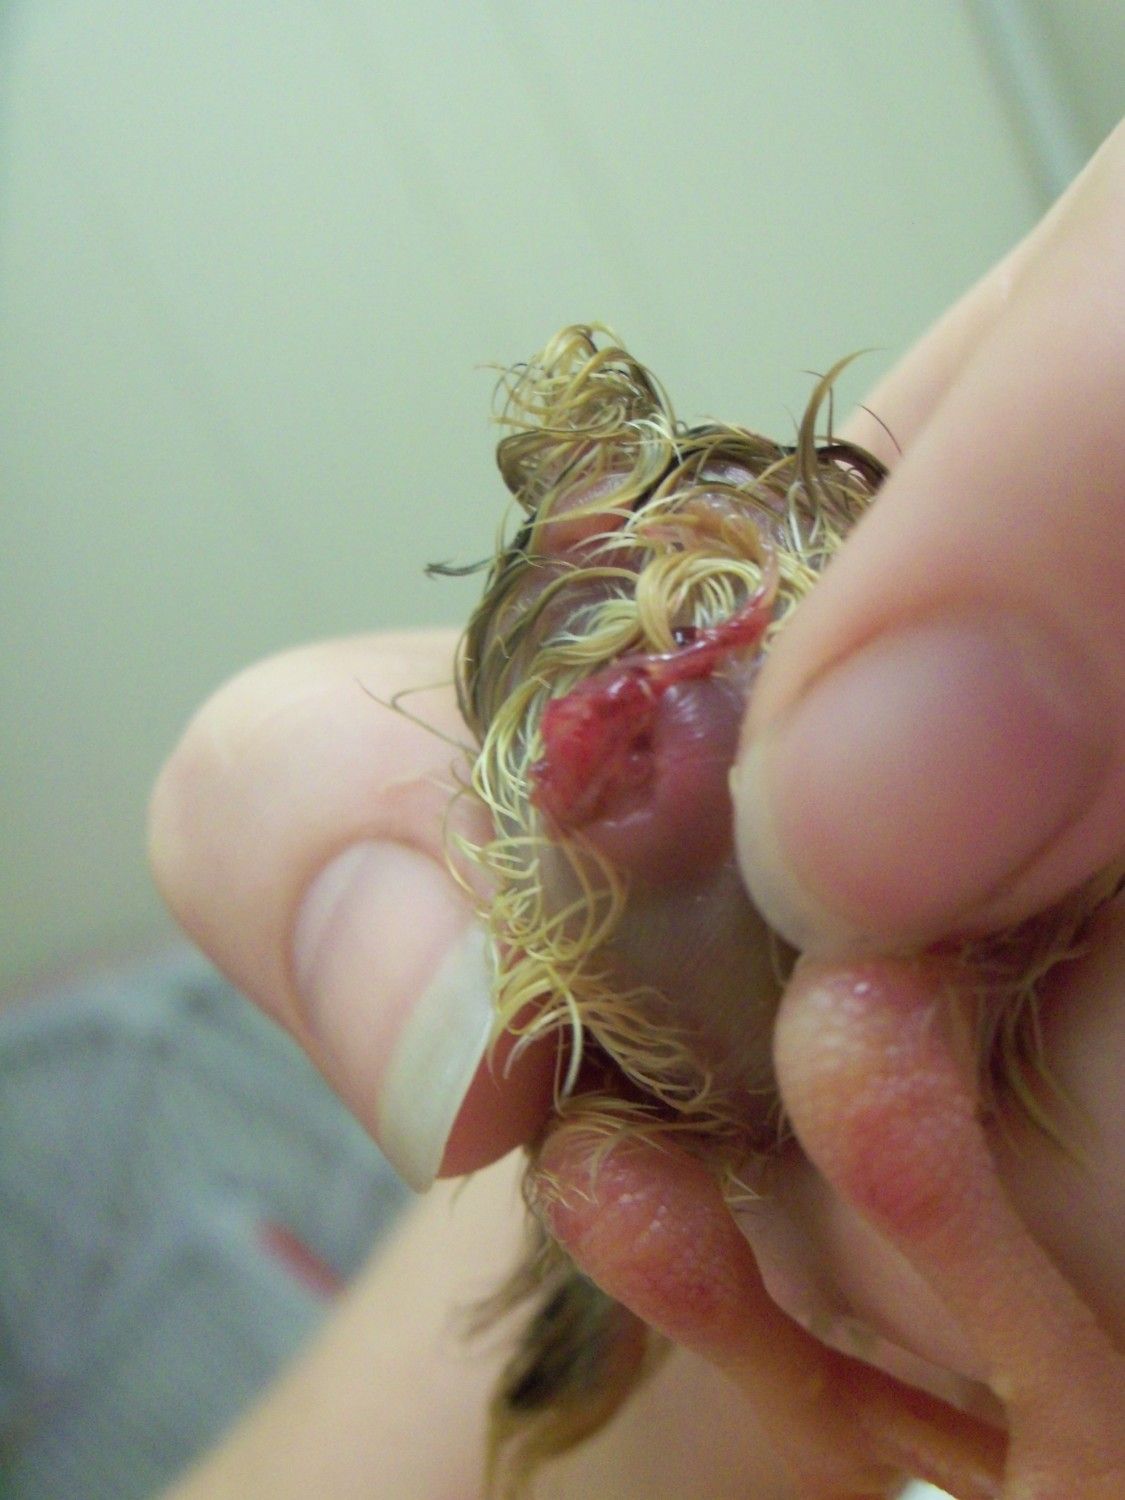 Something wrong with newborn chick's "umbilical cord"? *pic* | BackYard  Chickens - Learn How to Raise Chickens